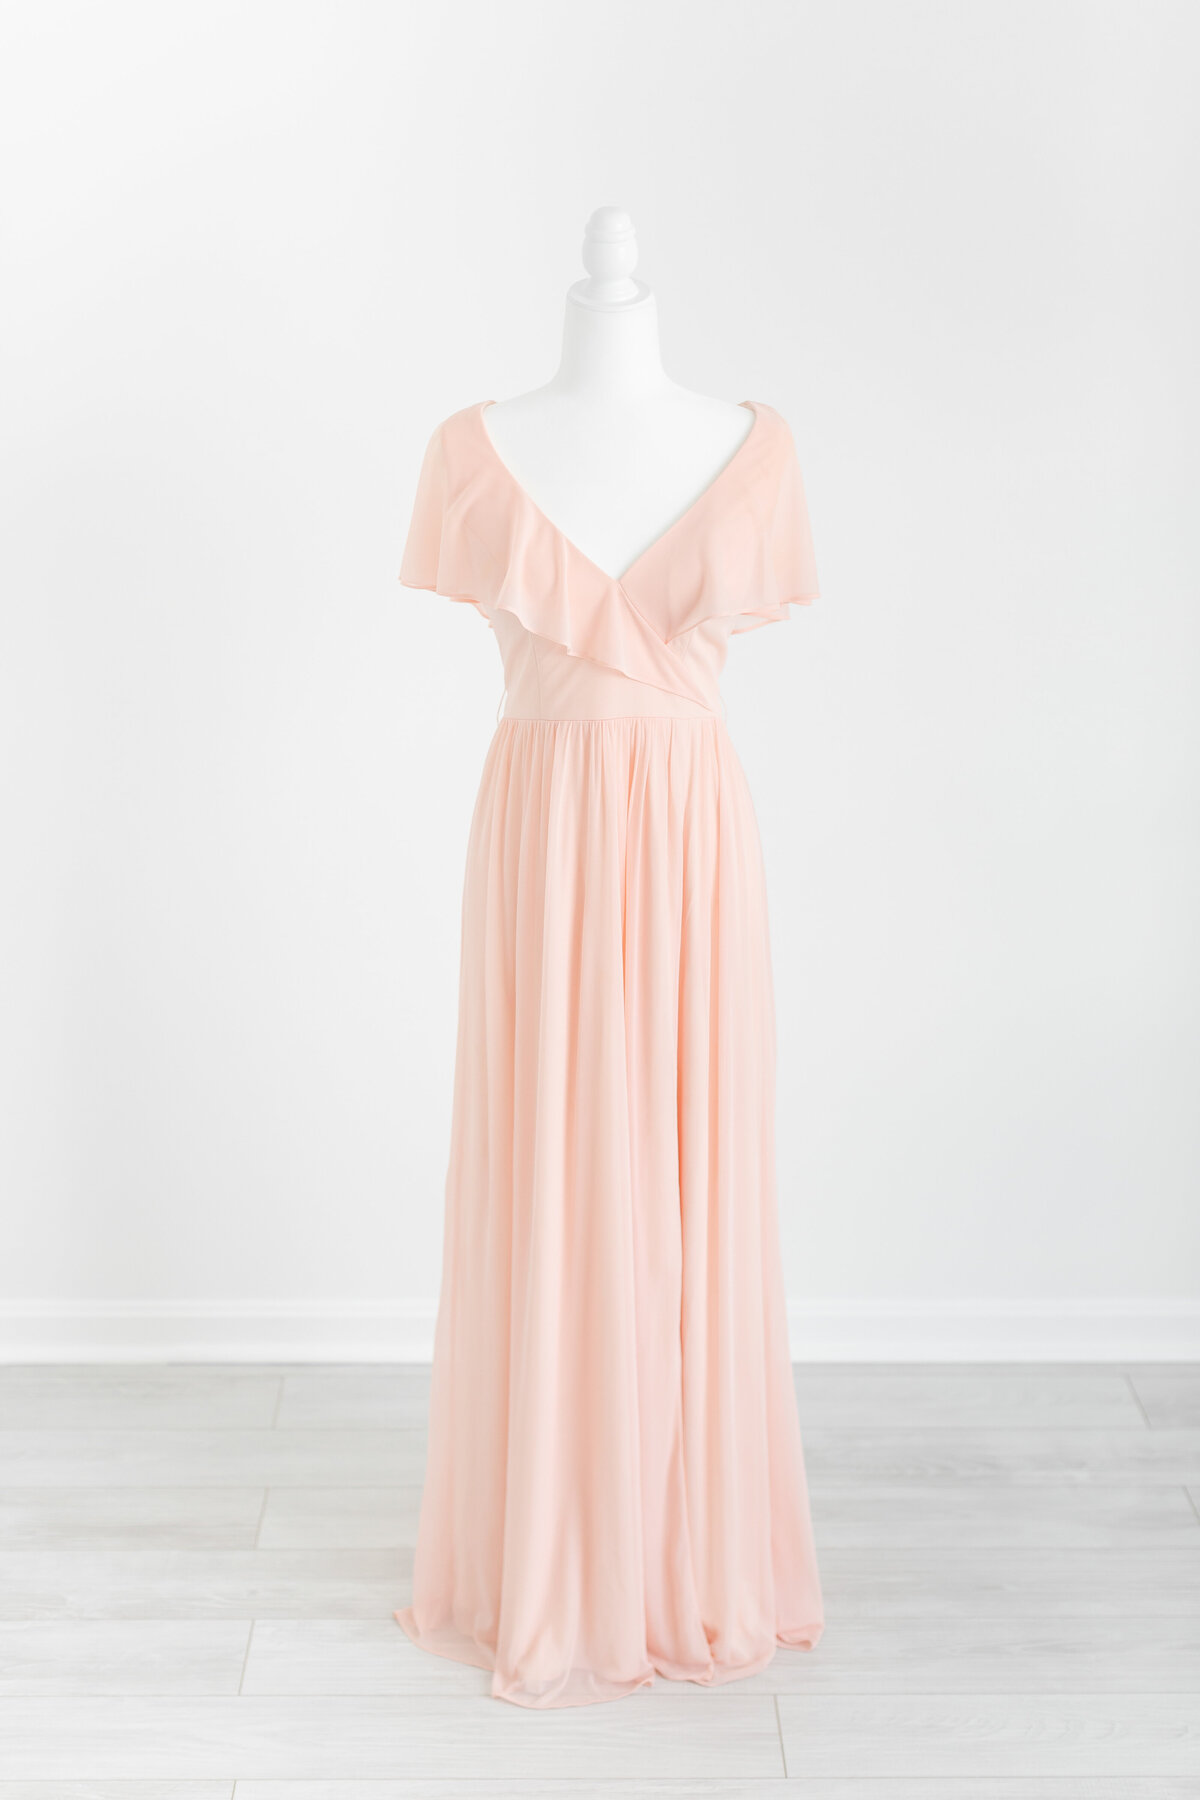 A salmon pink maxi dress with flutter sleeves and a v neck by Washington DC Photographer